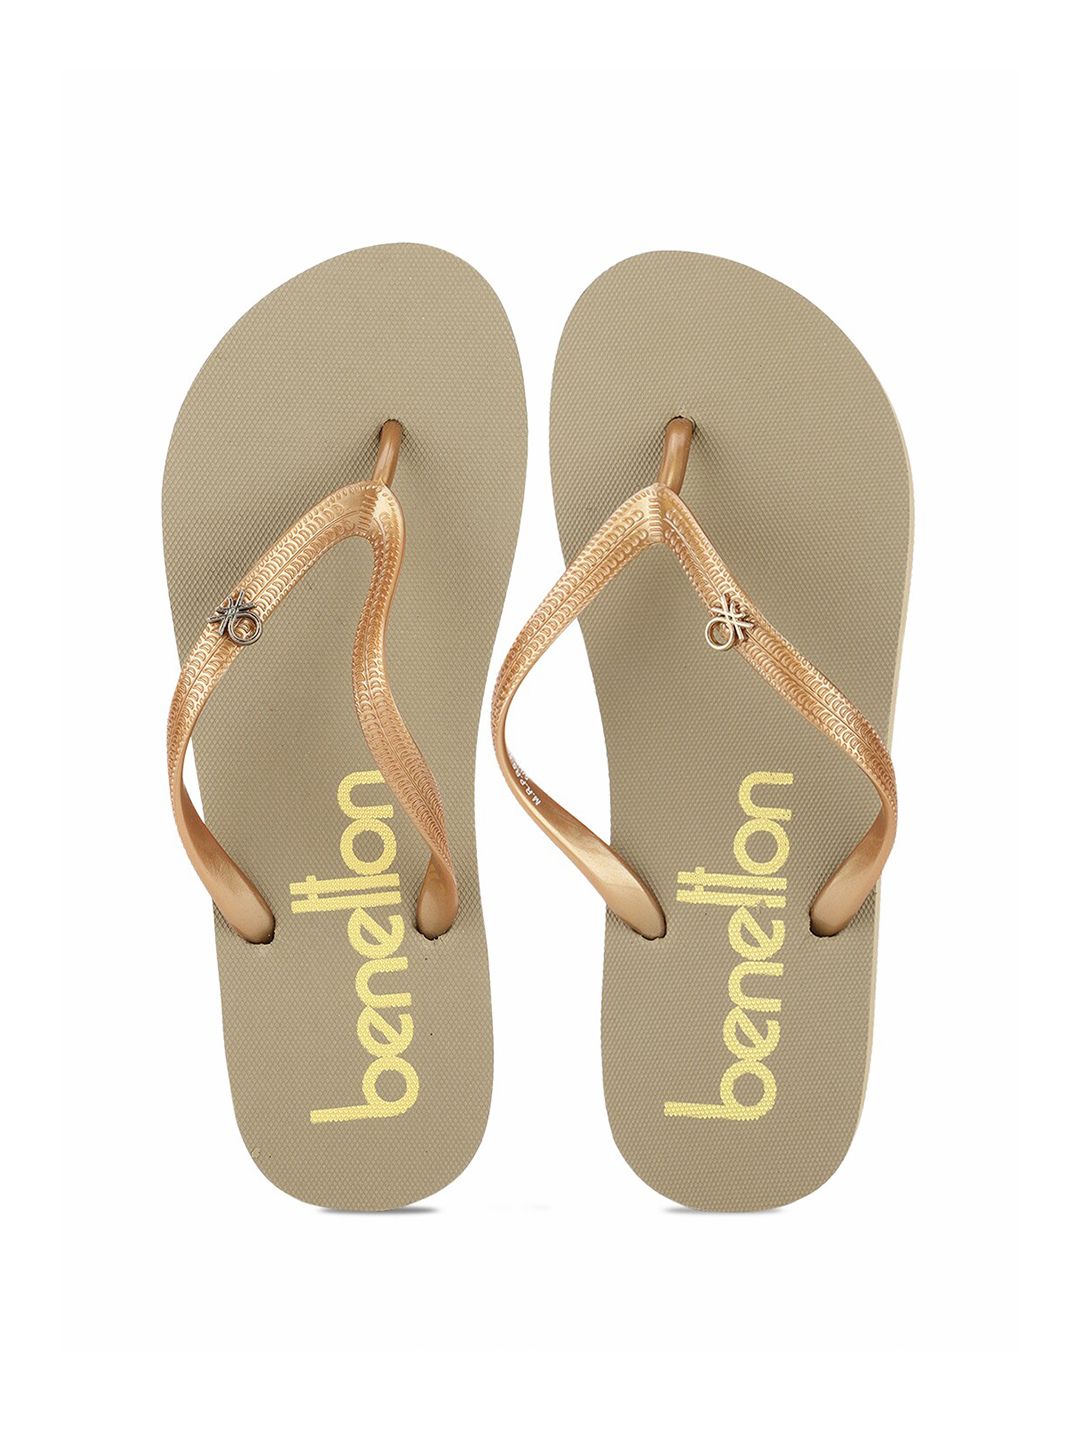 United Colors of Benetton Women Beige & Brown Printed Rubber Thong Flip-Flops Price in India